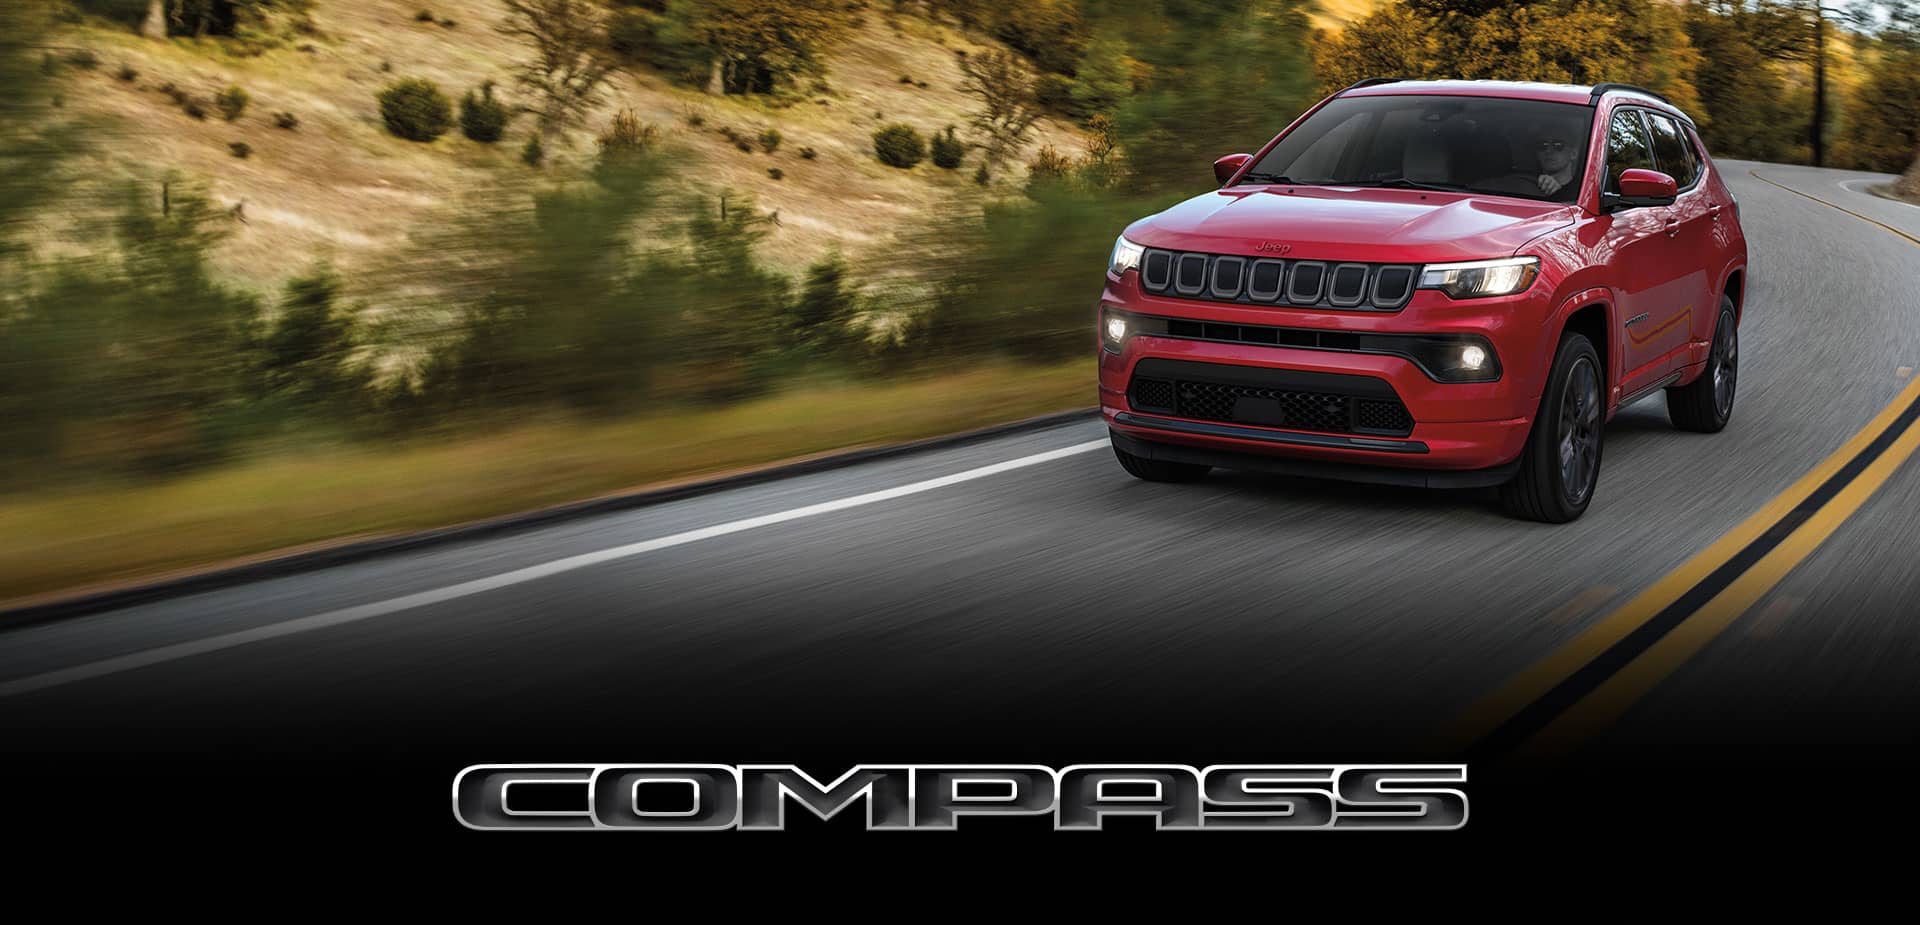 The 2022 Jeep Compass Red Edition being driven on a winding road.